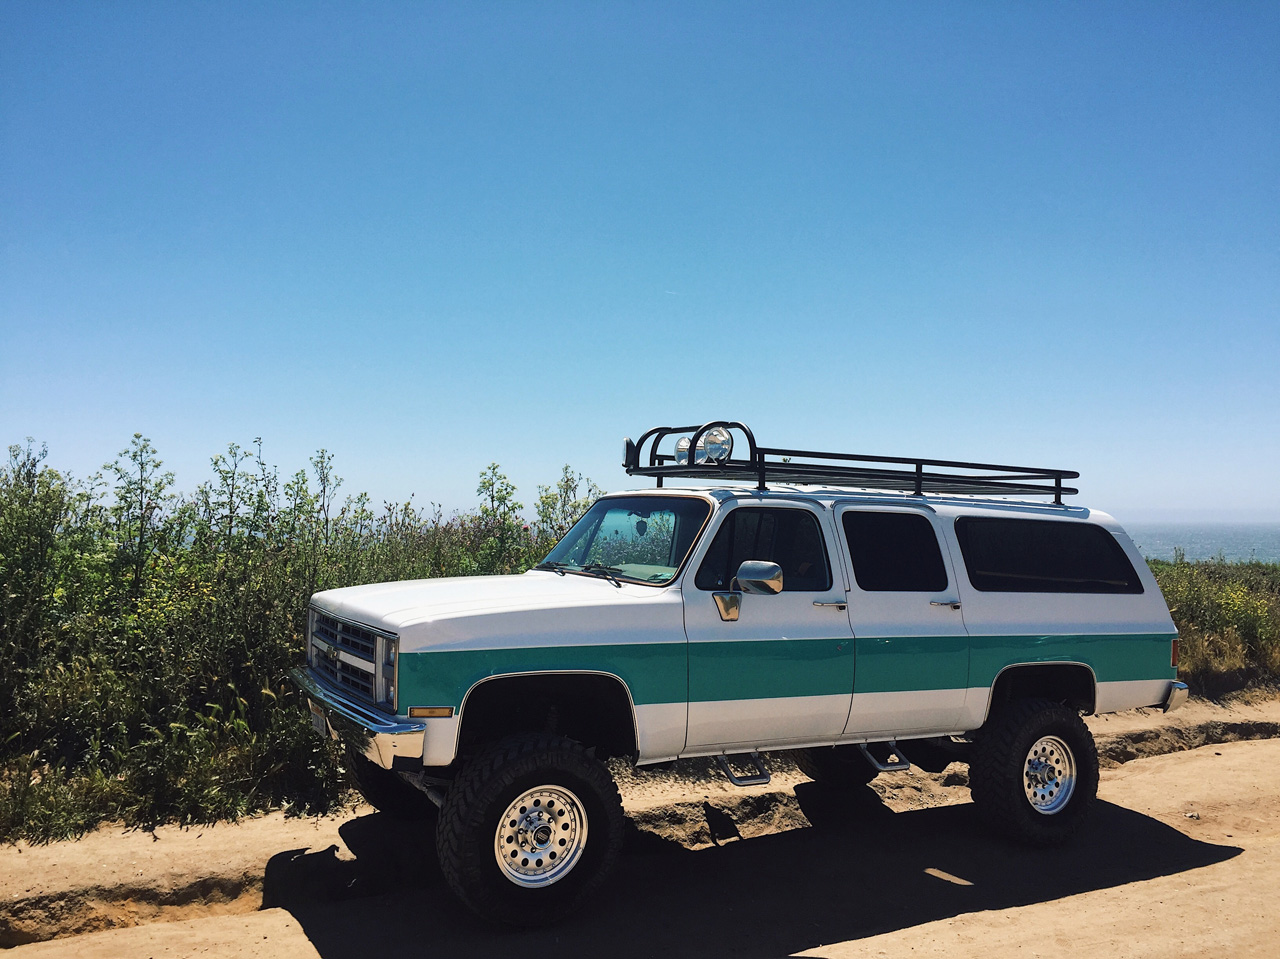 Chevy Suburban Square Body Roof Rack and Off-road Lights